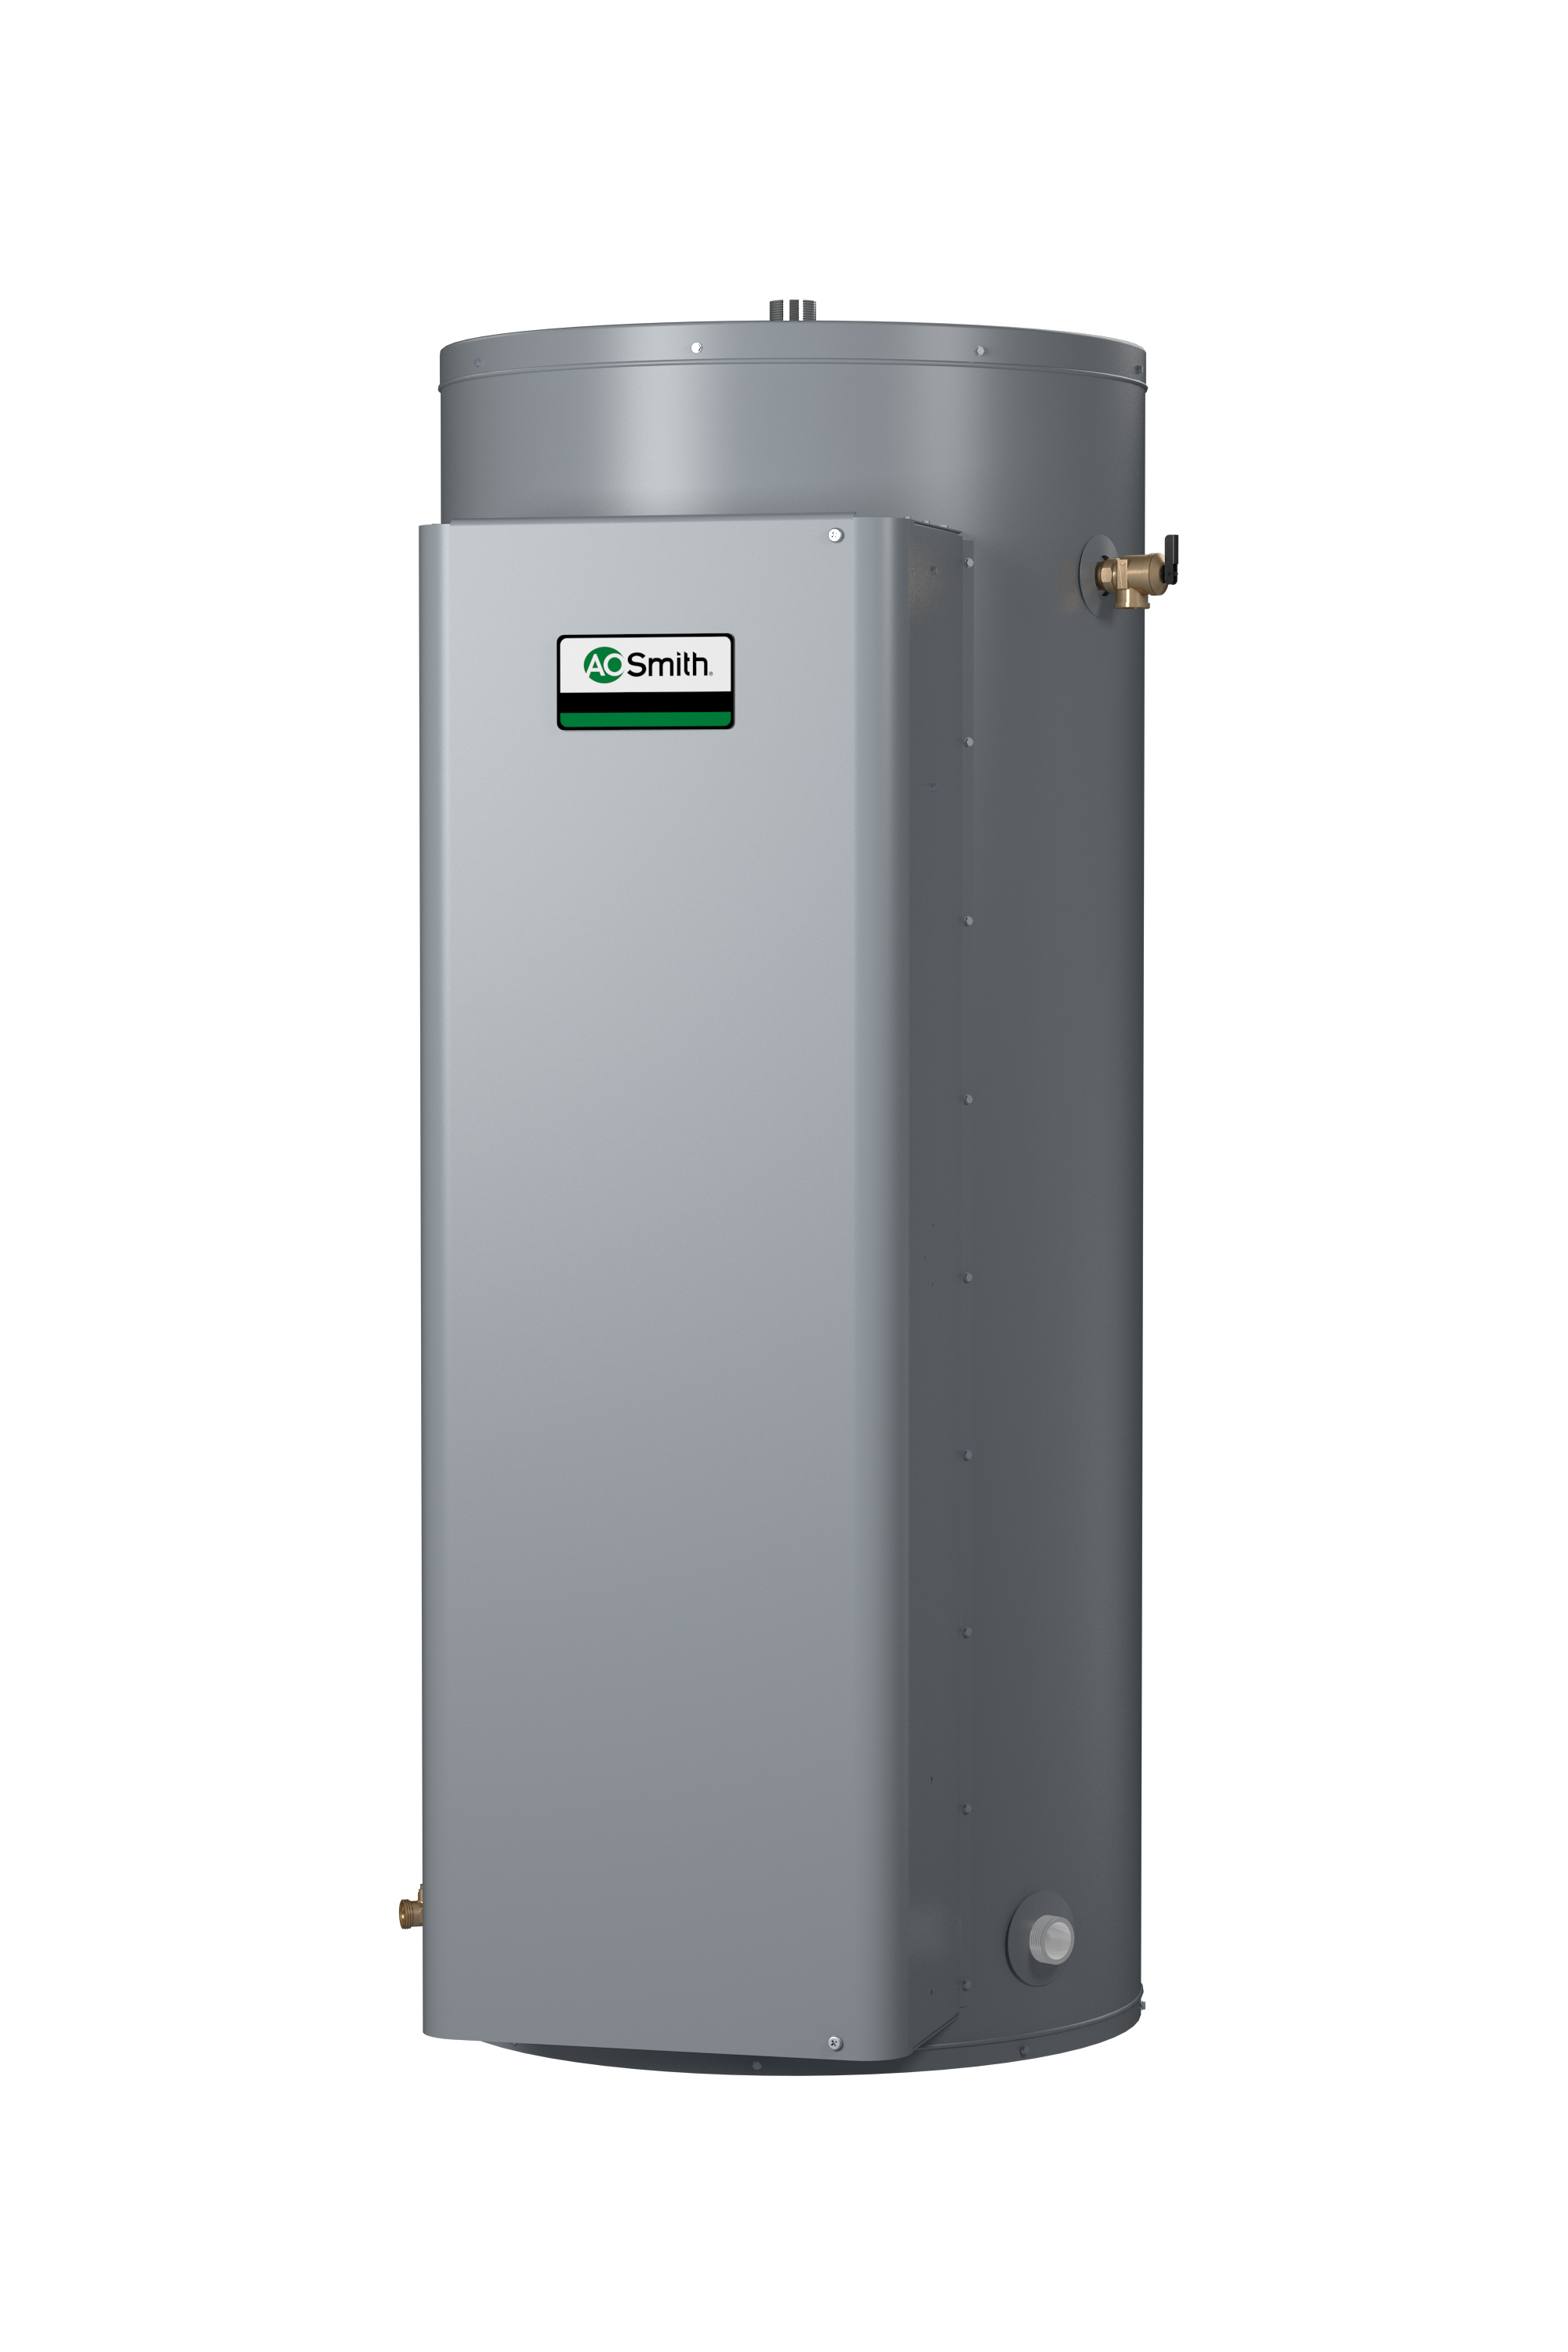 AO SMITH DRE-80-9, 80 GALLONS, 9.0KW, 480 VOLT, 18.8 AMPS, 1 PHASE, 3 ELEMENT, COMMERCIAL ELECTRIC WATER HEATER, GOLD SERIES